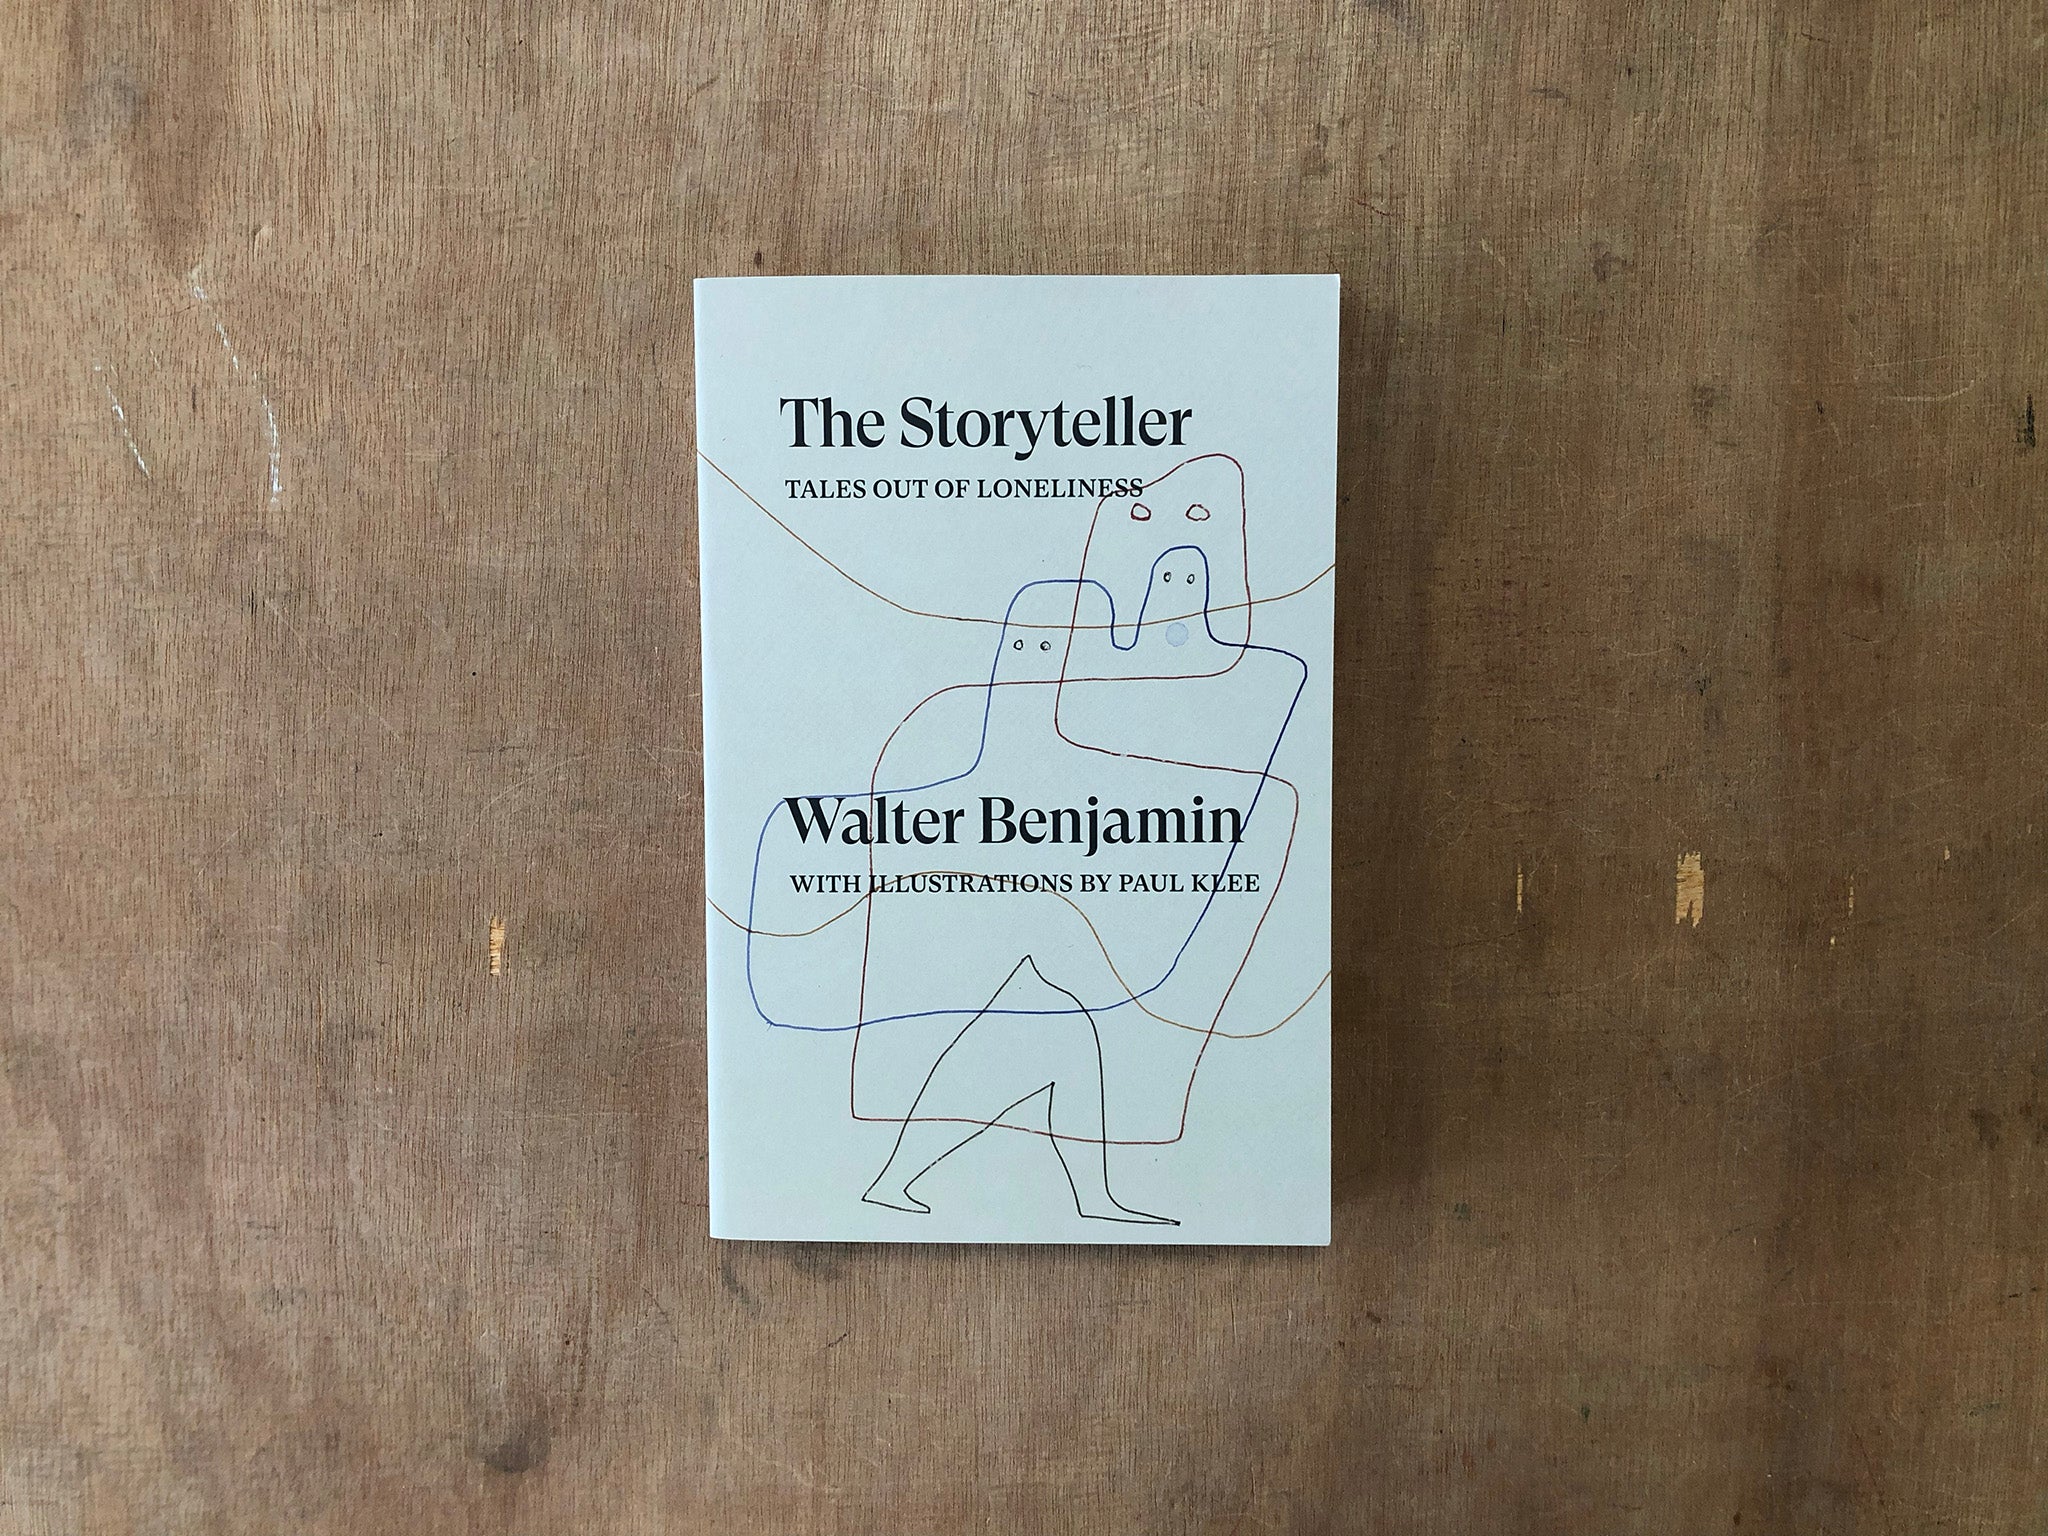 THE STORYTELLER: TALES OUT OF LONELINESS by Walter Benjamin